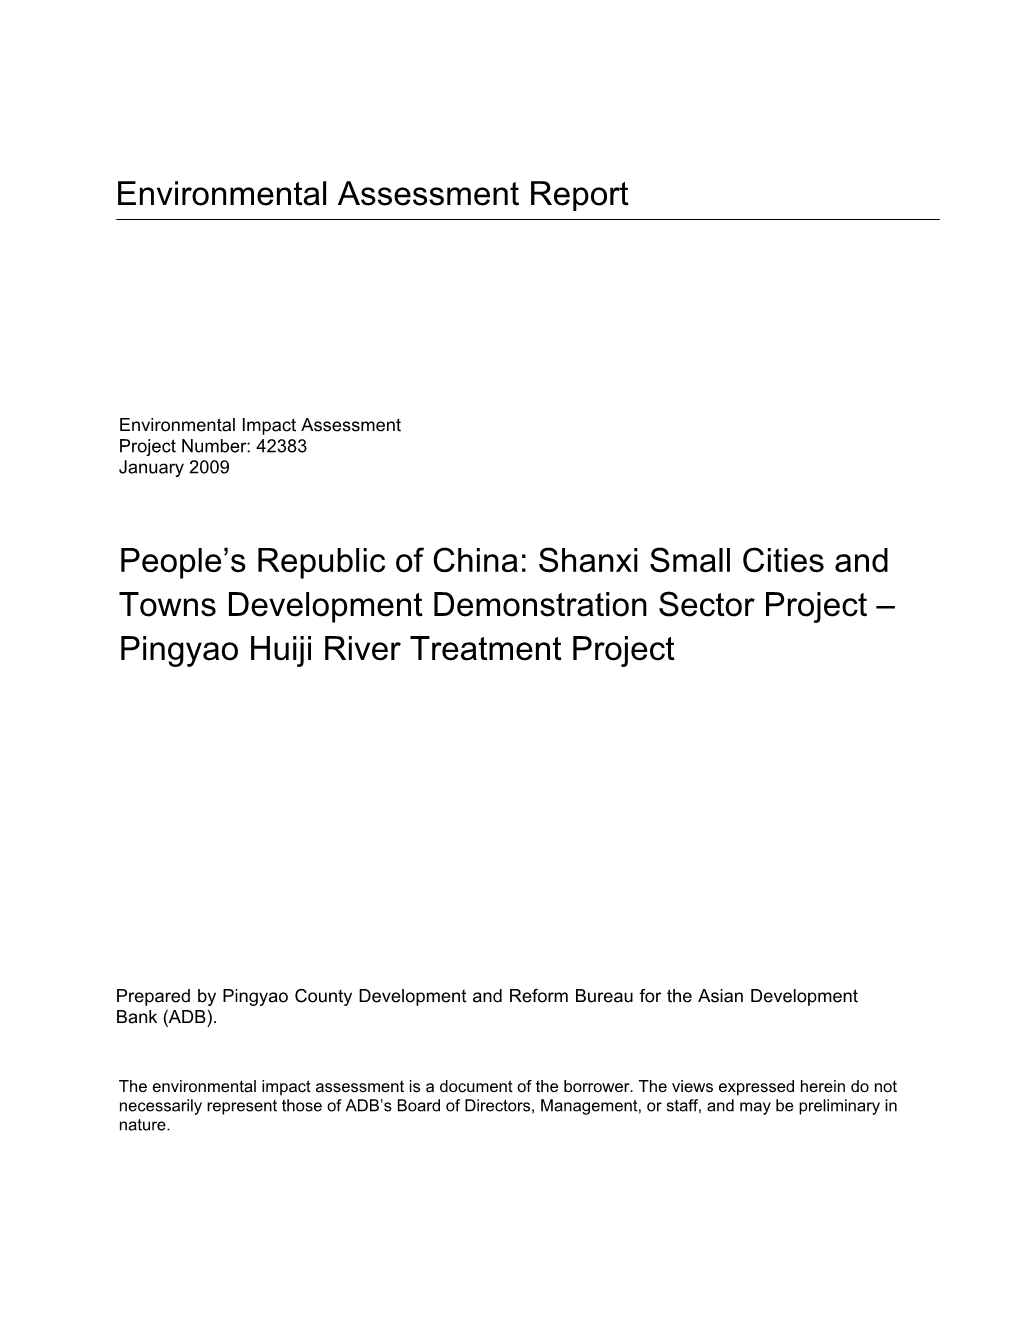 Shanxi Small Cities and Towns Development Demonstration Sector Project – Pingyao Huiji River Treatment Project